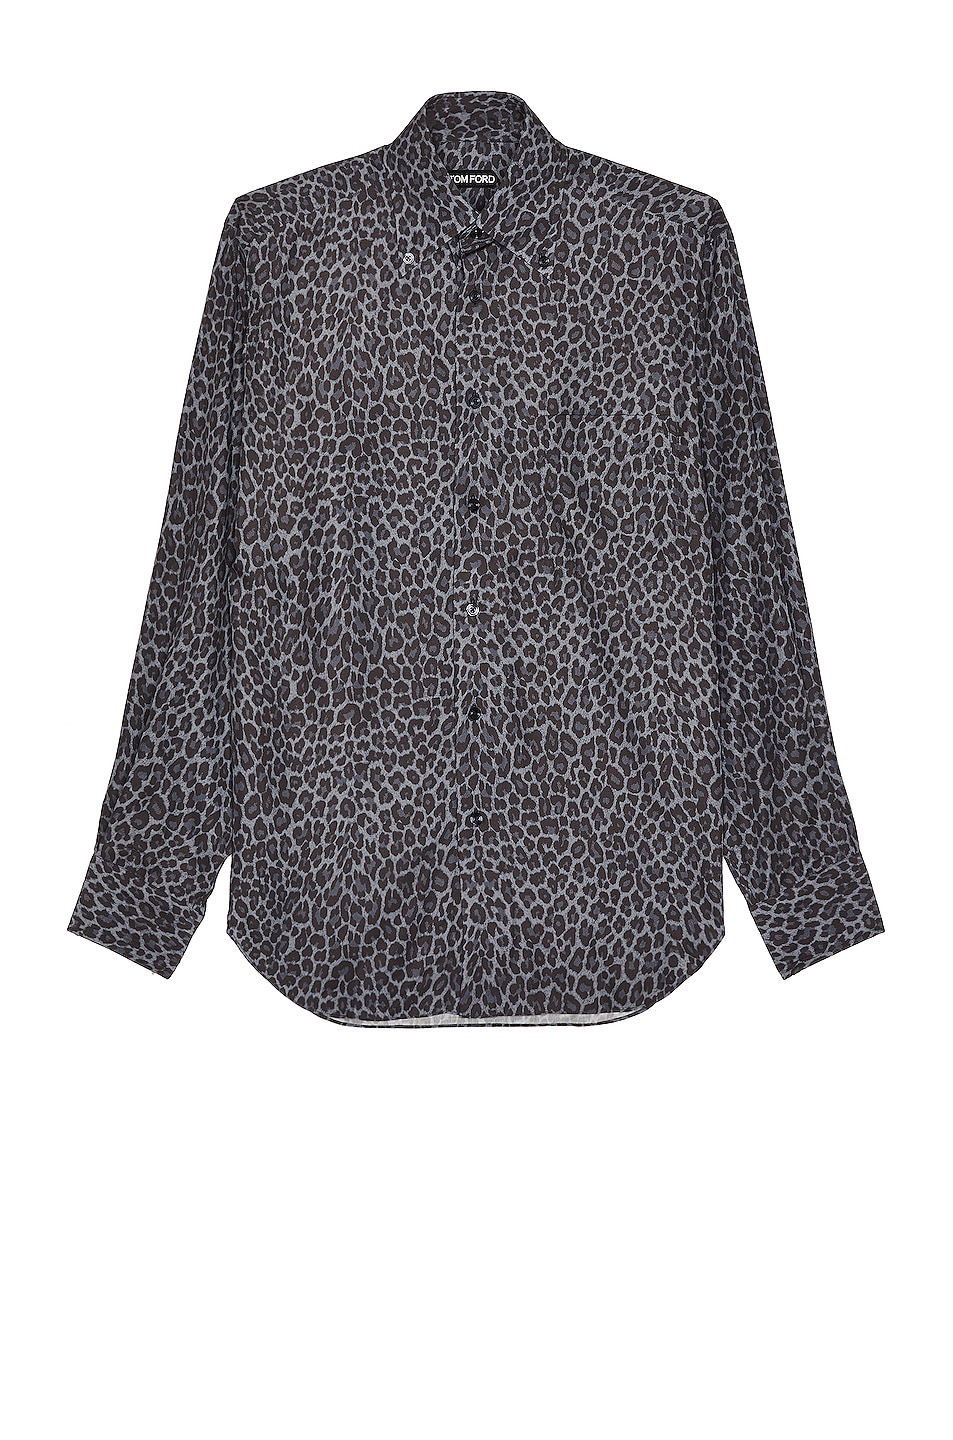 Image 1 of TOM FORD Leopard Printed Shirt in Dark Grey